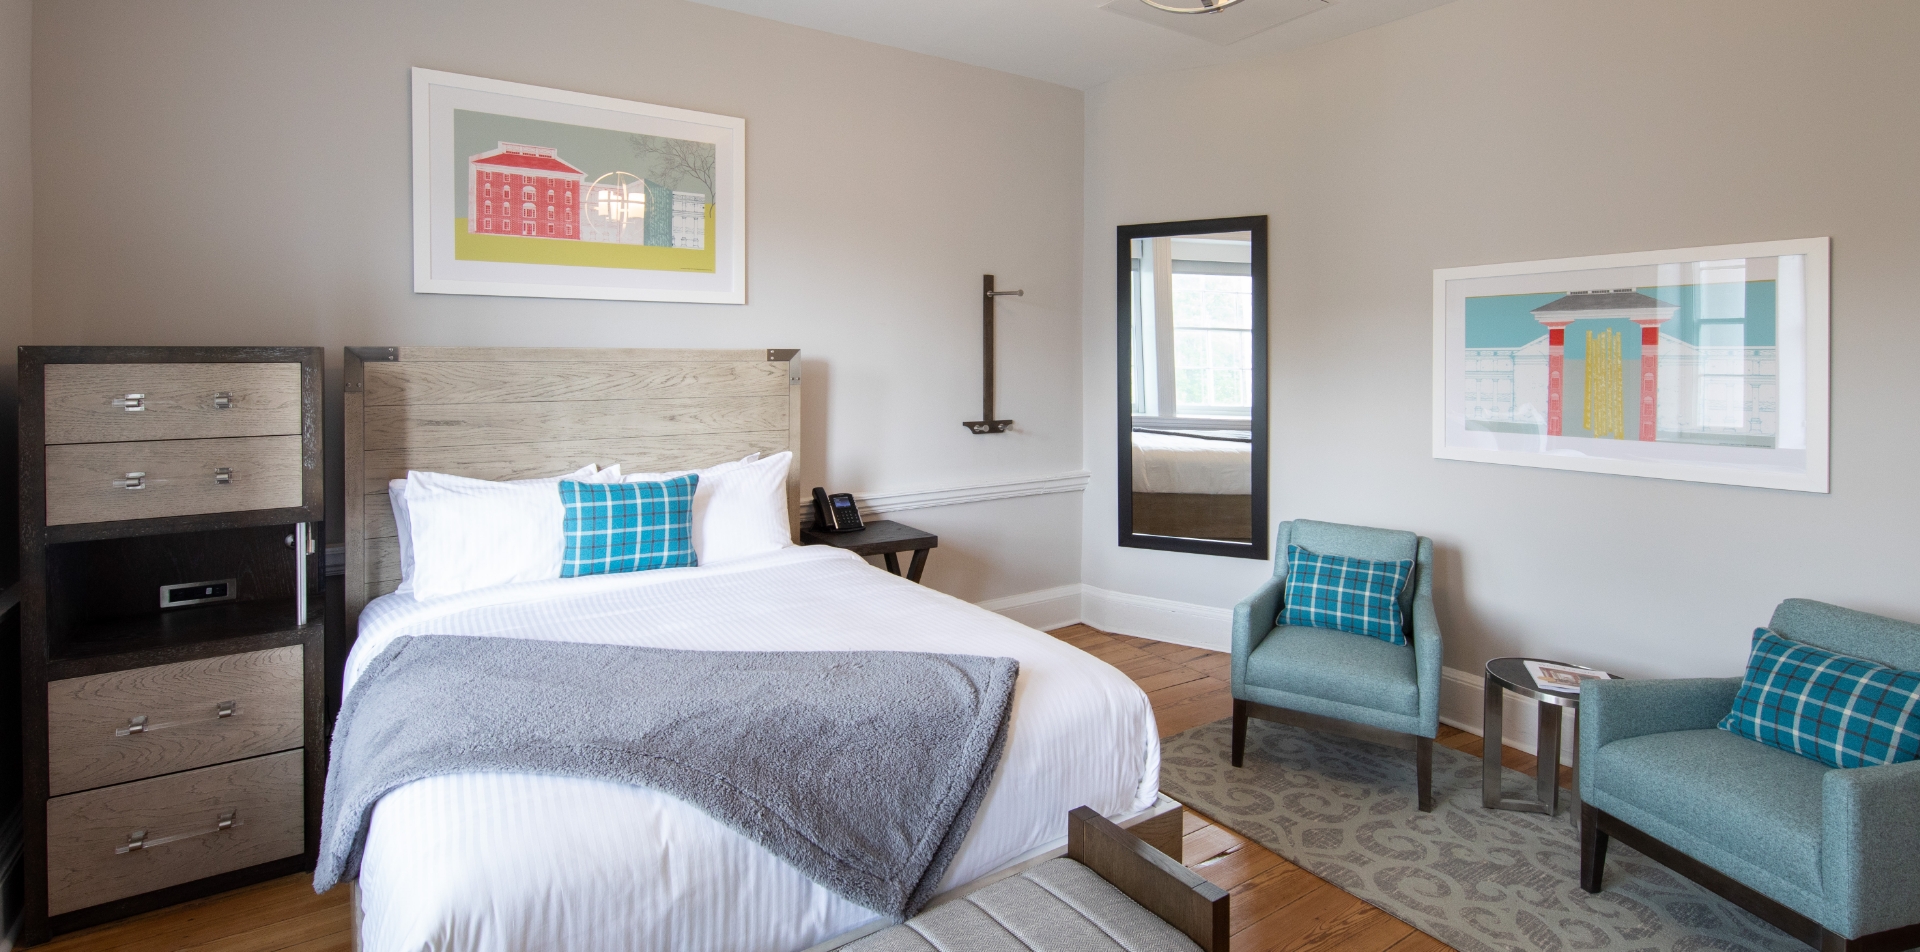 A guest room at the Blackburn Inn in Staunton Virginia is decorated with light wood furniture, blue chairs and white linens. Colorful paintings and a full size mirror hang on the wall. 